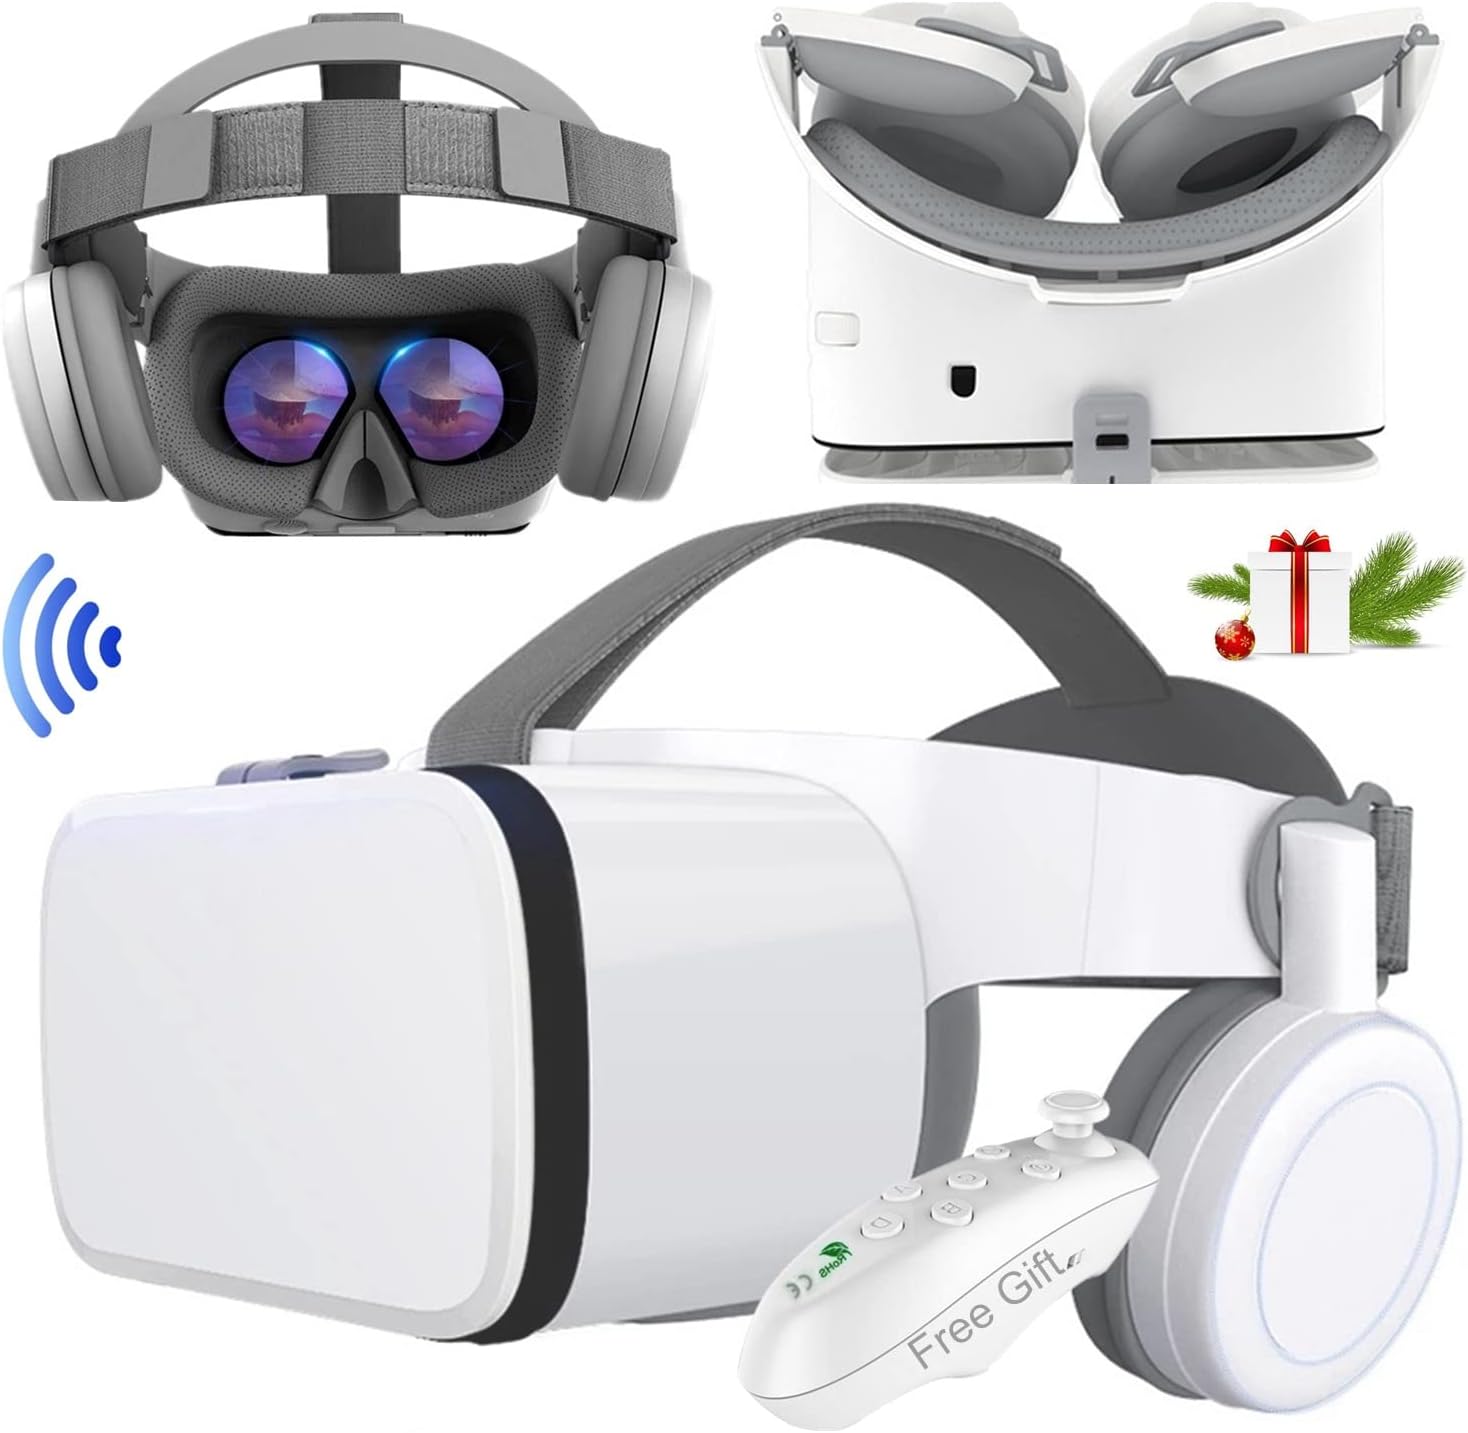 VR Headset, Virtual Reality Headset w/Controller & [...]